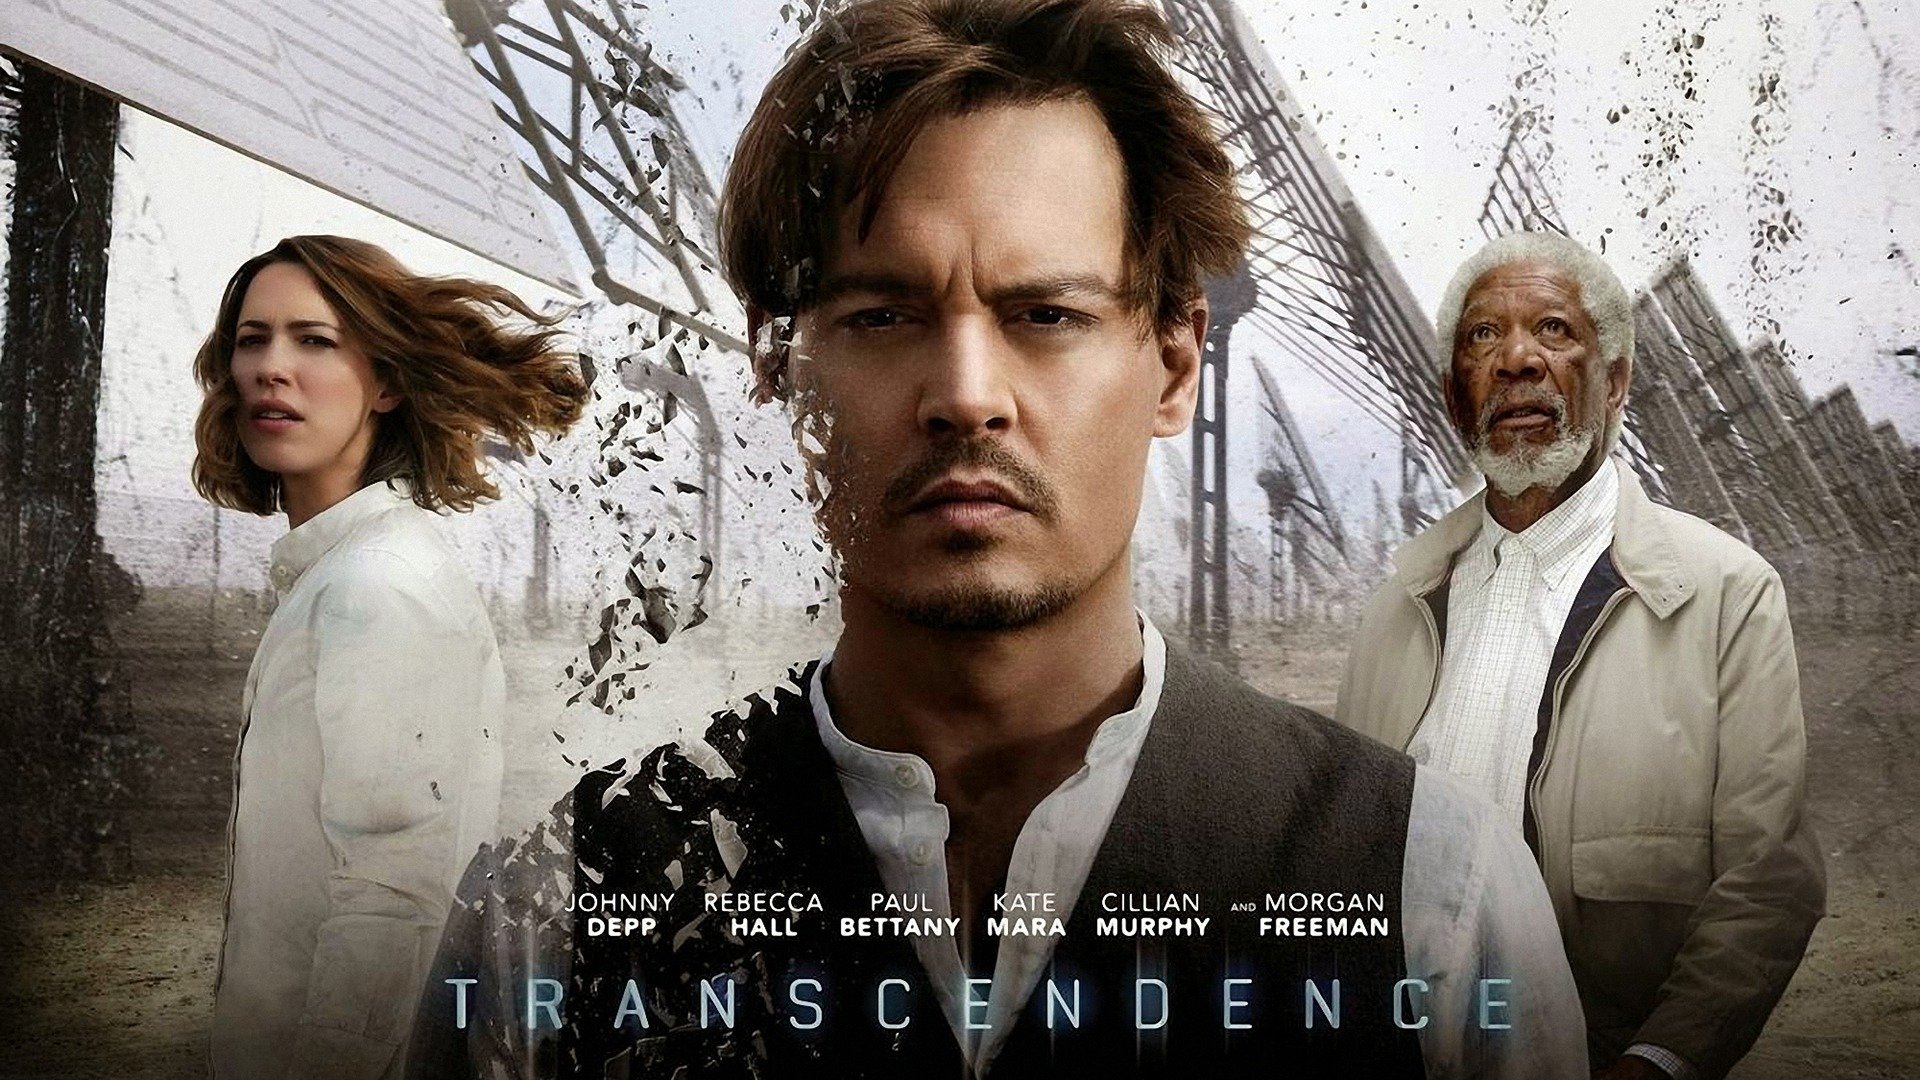 Watch: Boot Up 'Transcendence' With 7 Minutes From Johnny Depp's Sci-Fi  Film Plus TV Spot & New Viral Video